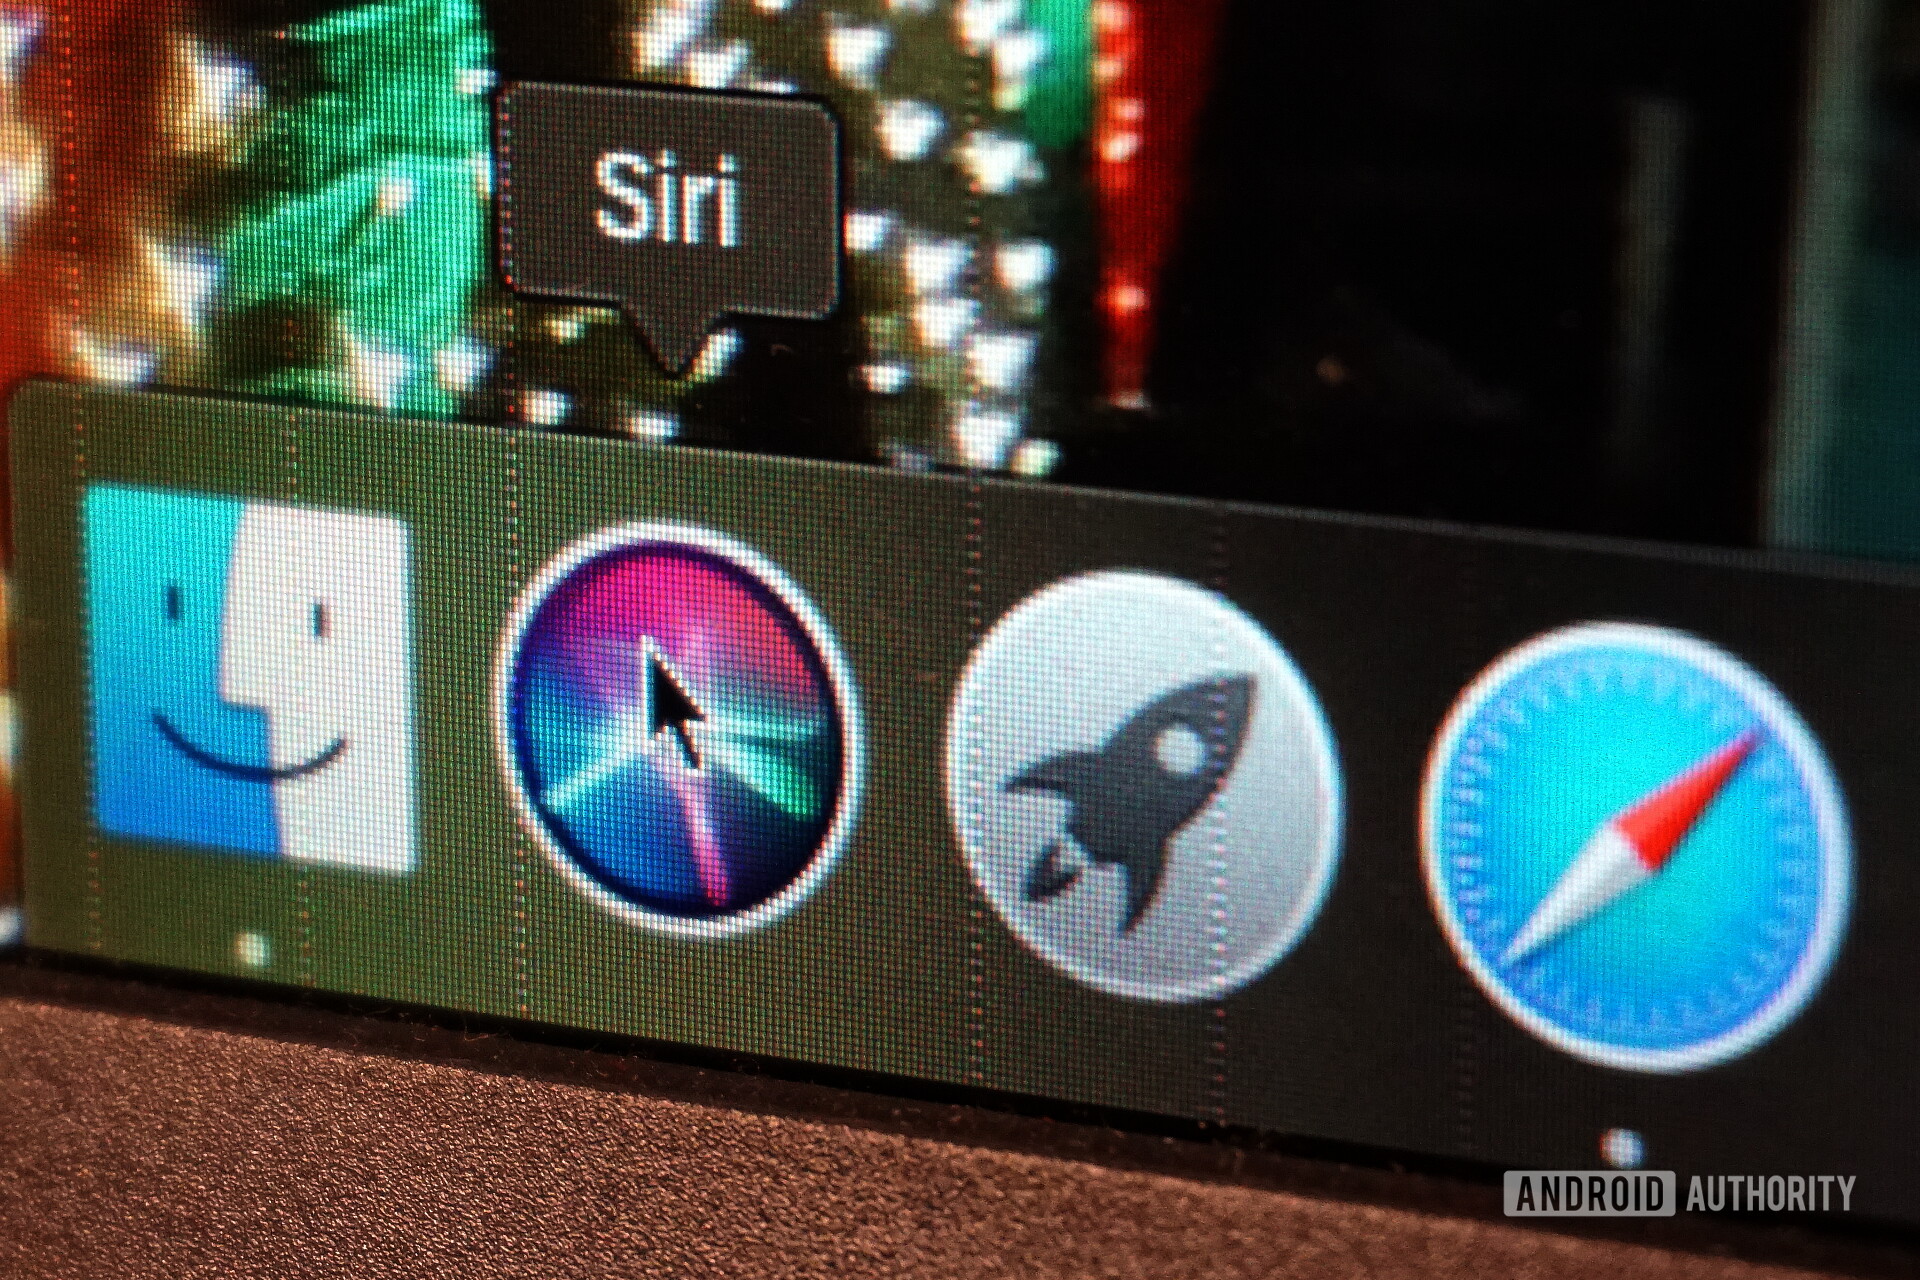 The Siri dock icon in macOS